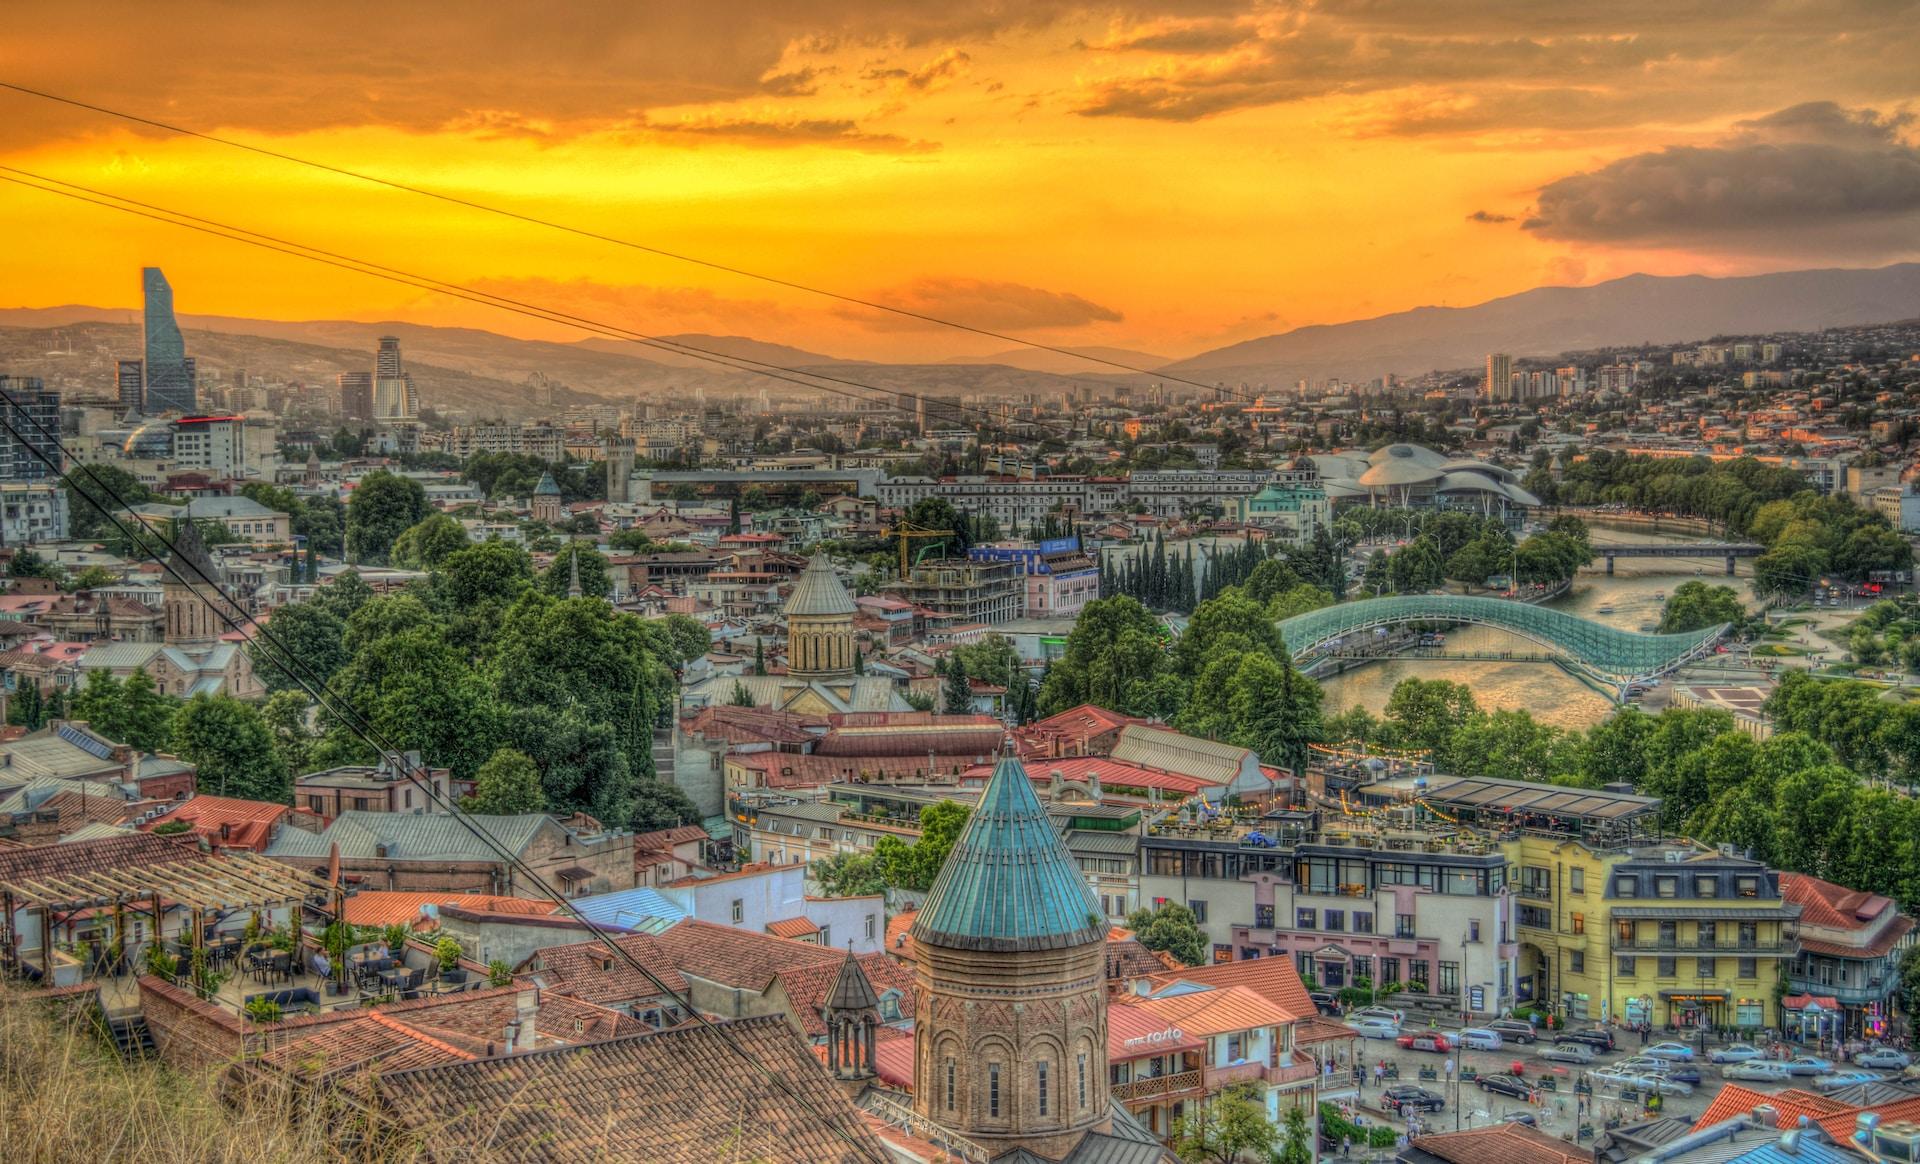 Tbilisi, Georgia: view of the city at sunset.